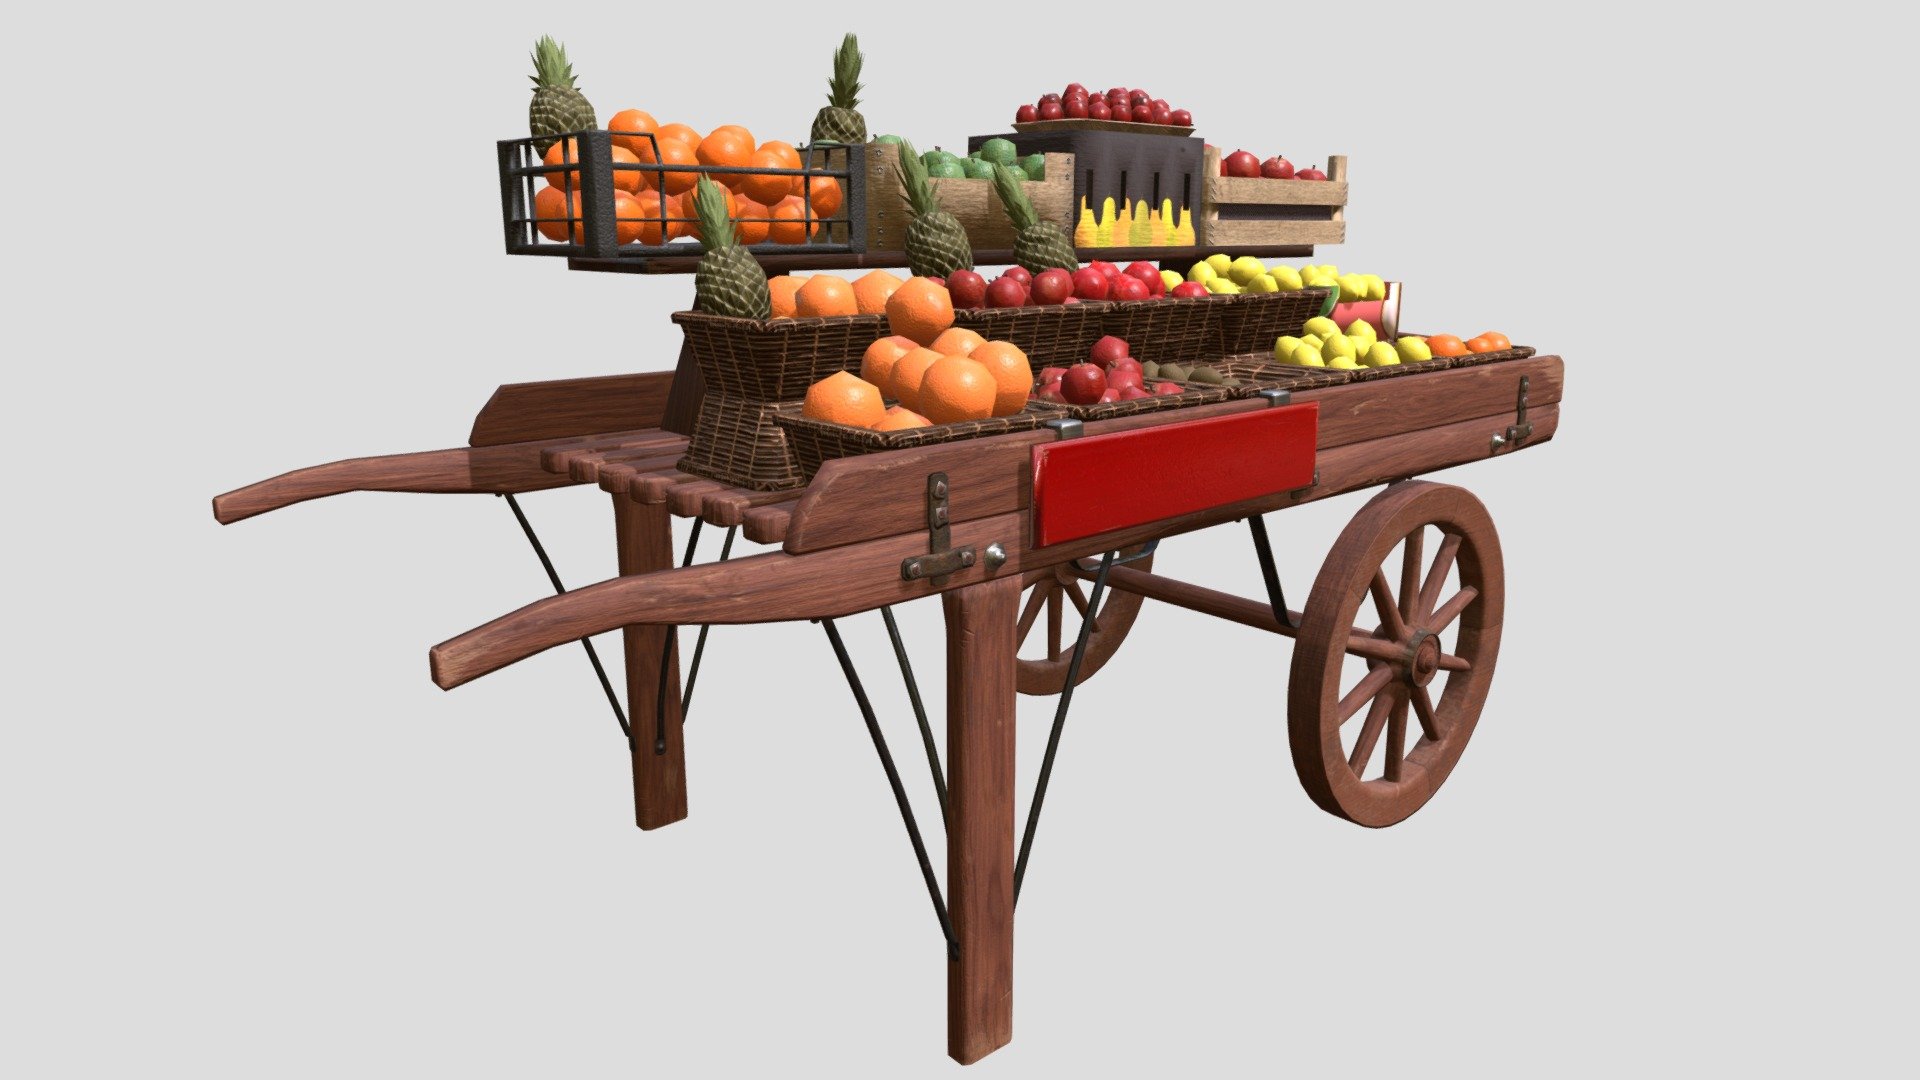 A Model of a fruit cart made for a Live Brief at the University of Hertfordshire in collaboration with Playground Games. The goal was to recreate the cart from selected reference images and keep the total poly count under 25k polys / 50k tris.

This model was created for games use and thus contains triangles in certain areas 3d model